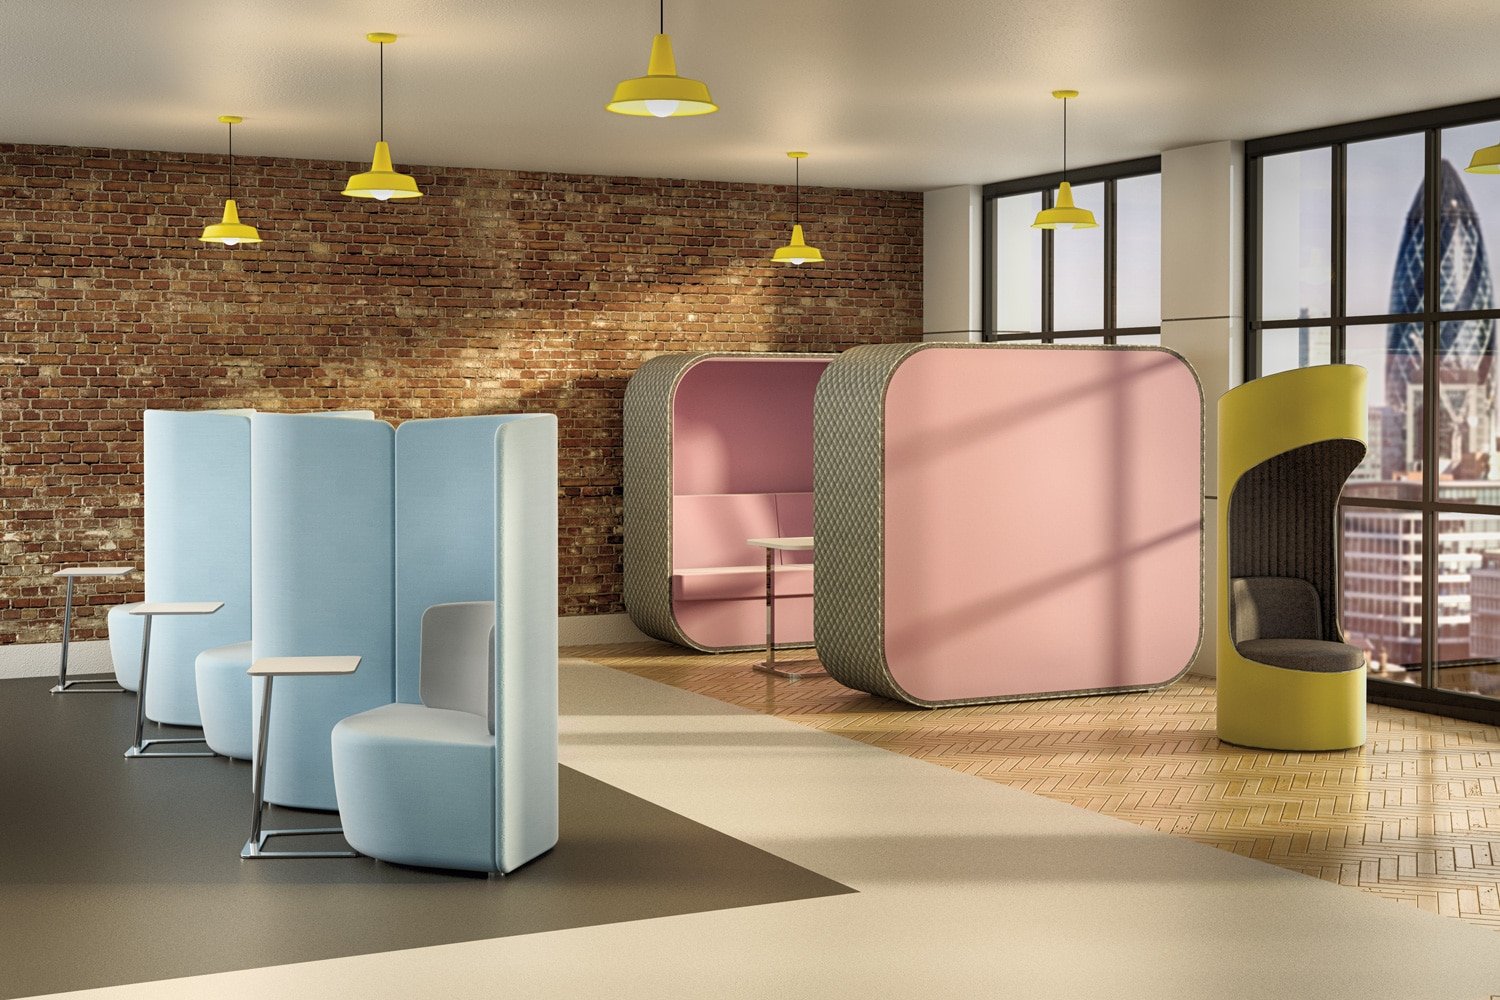 https://www.collaborative-office.com/wp-content/uploads/2017/09/cocoon-seating-community-space.jpg